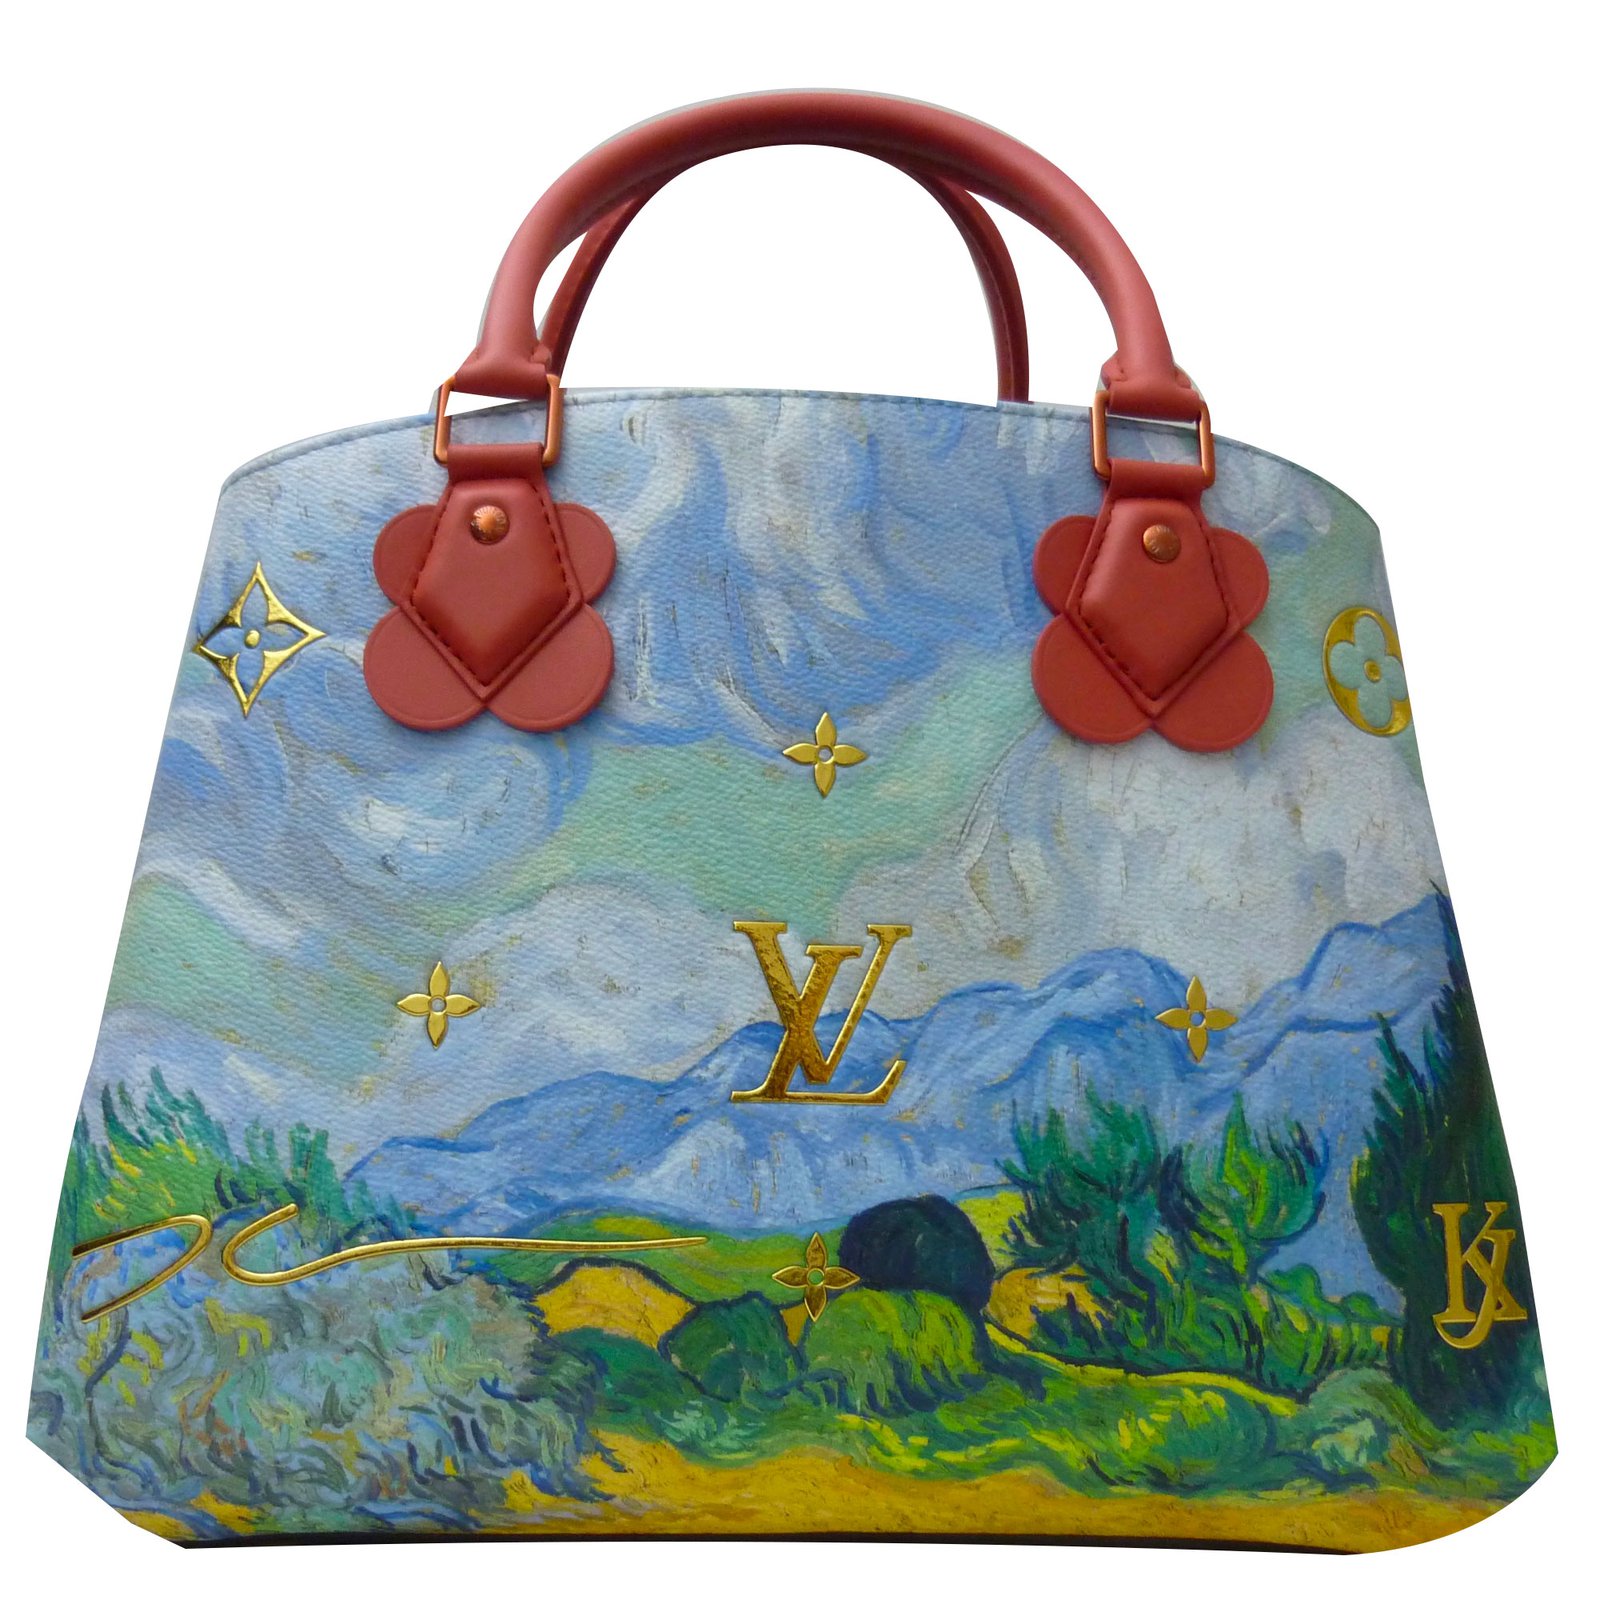 Louis Vuitton Vincent Van Gogh Bag | Confederated Tribes of the Umatilla Indian Reservation